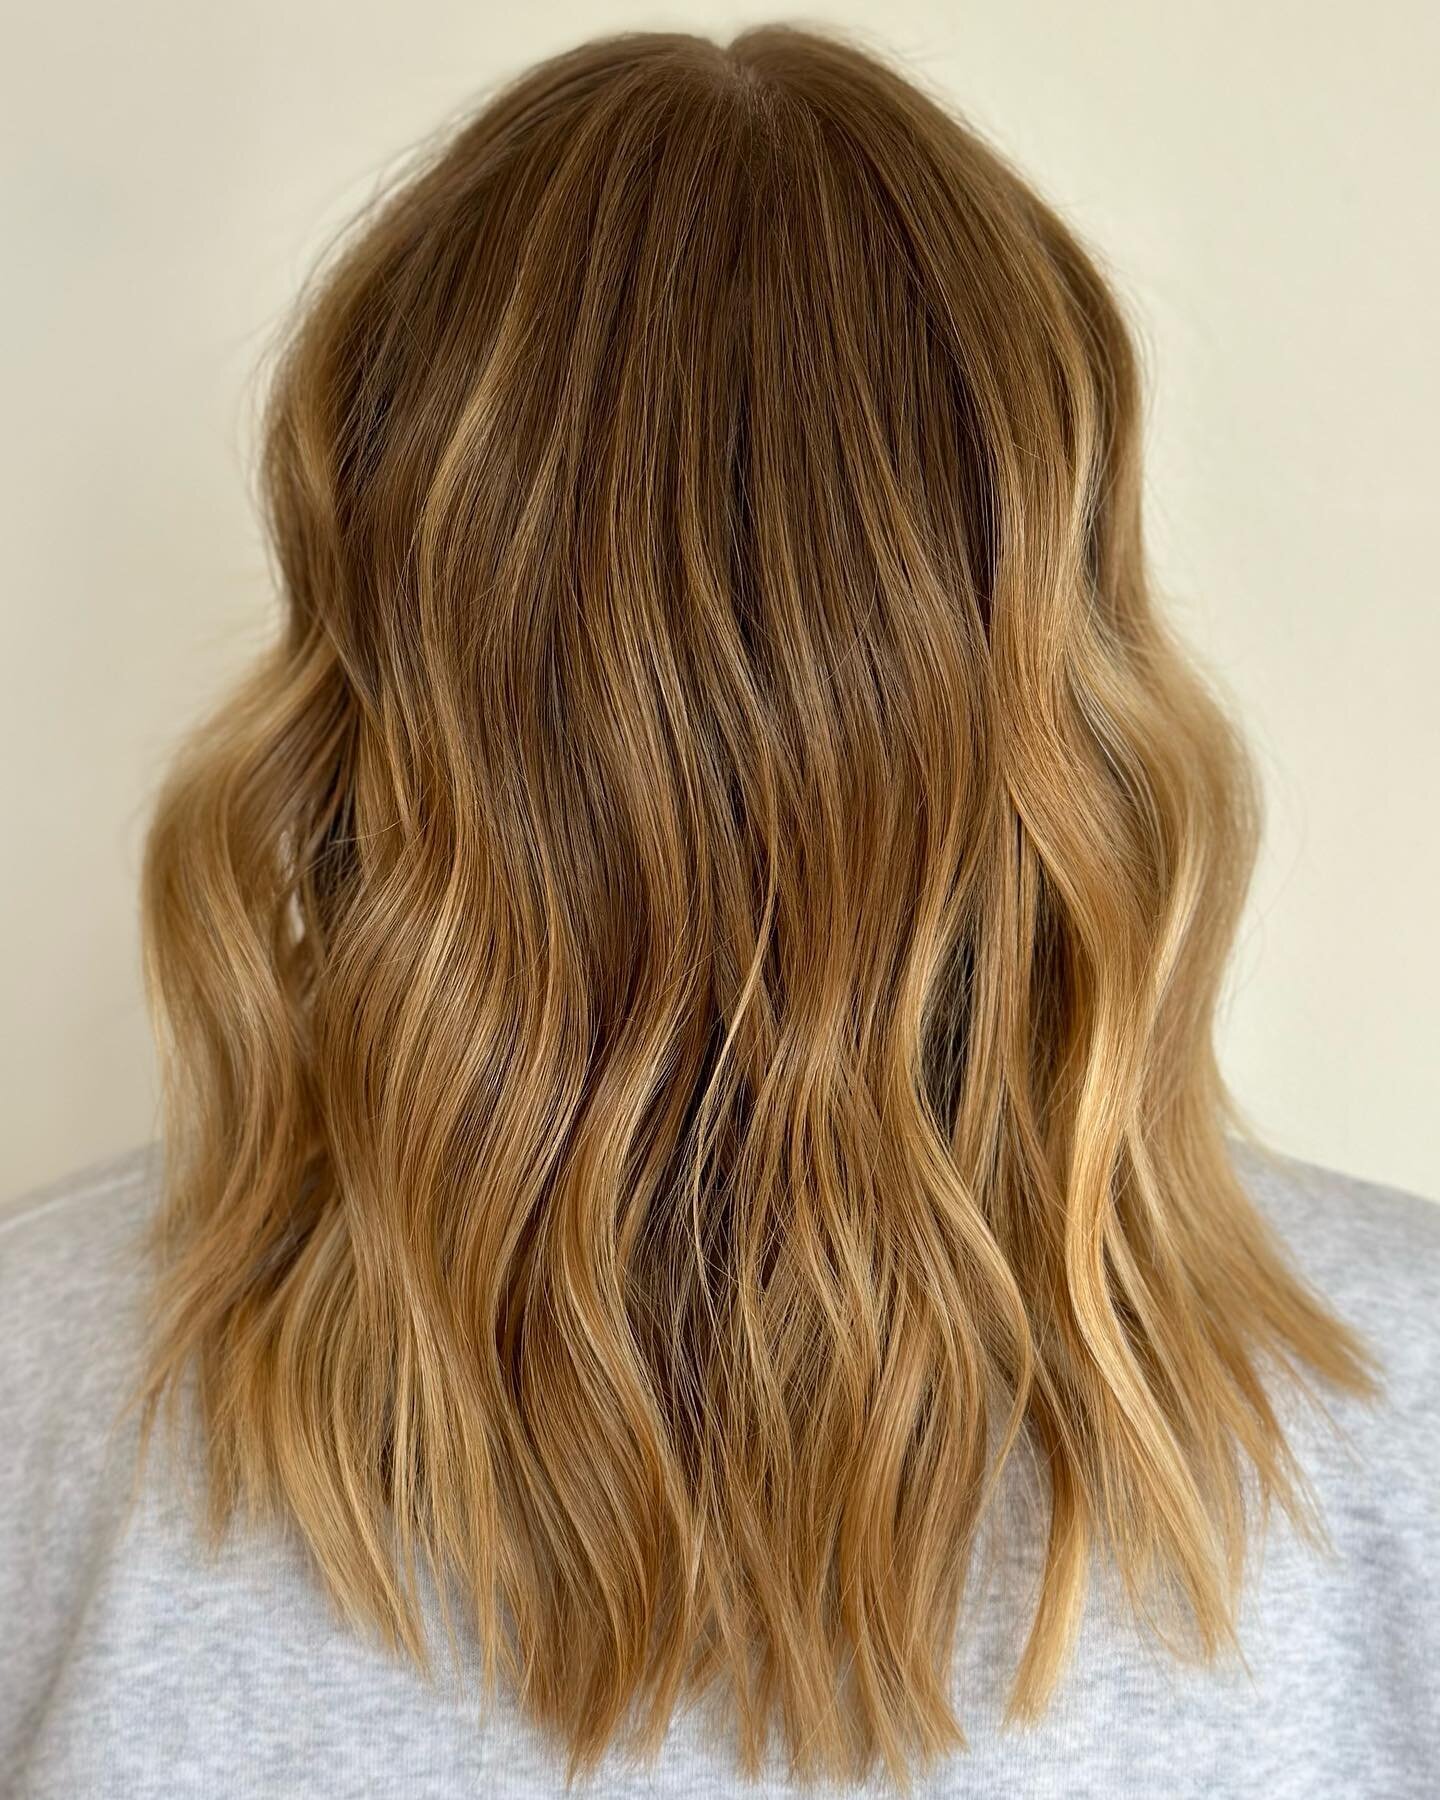 Nothing like that hand painted balayage 💛 

With three cancellations this week, let&rsquo;s create some magic! Full color appointments Thursday 1/2 @ 10am, Saturday @ 10am and 1pm! Call @hairsalonkc or book online 😘